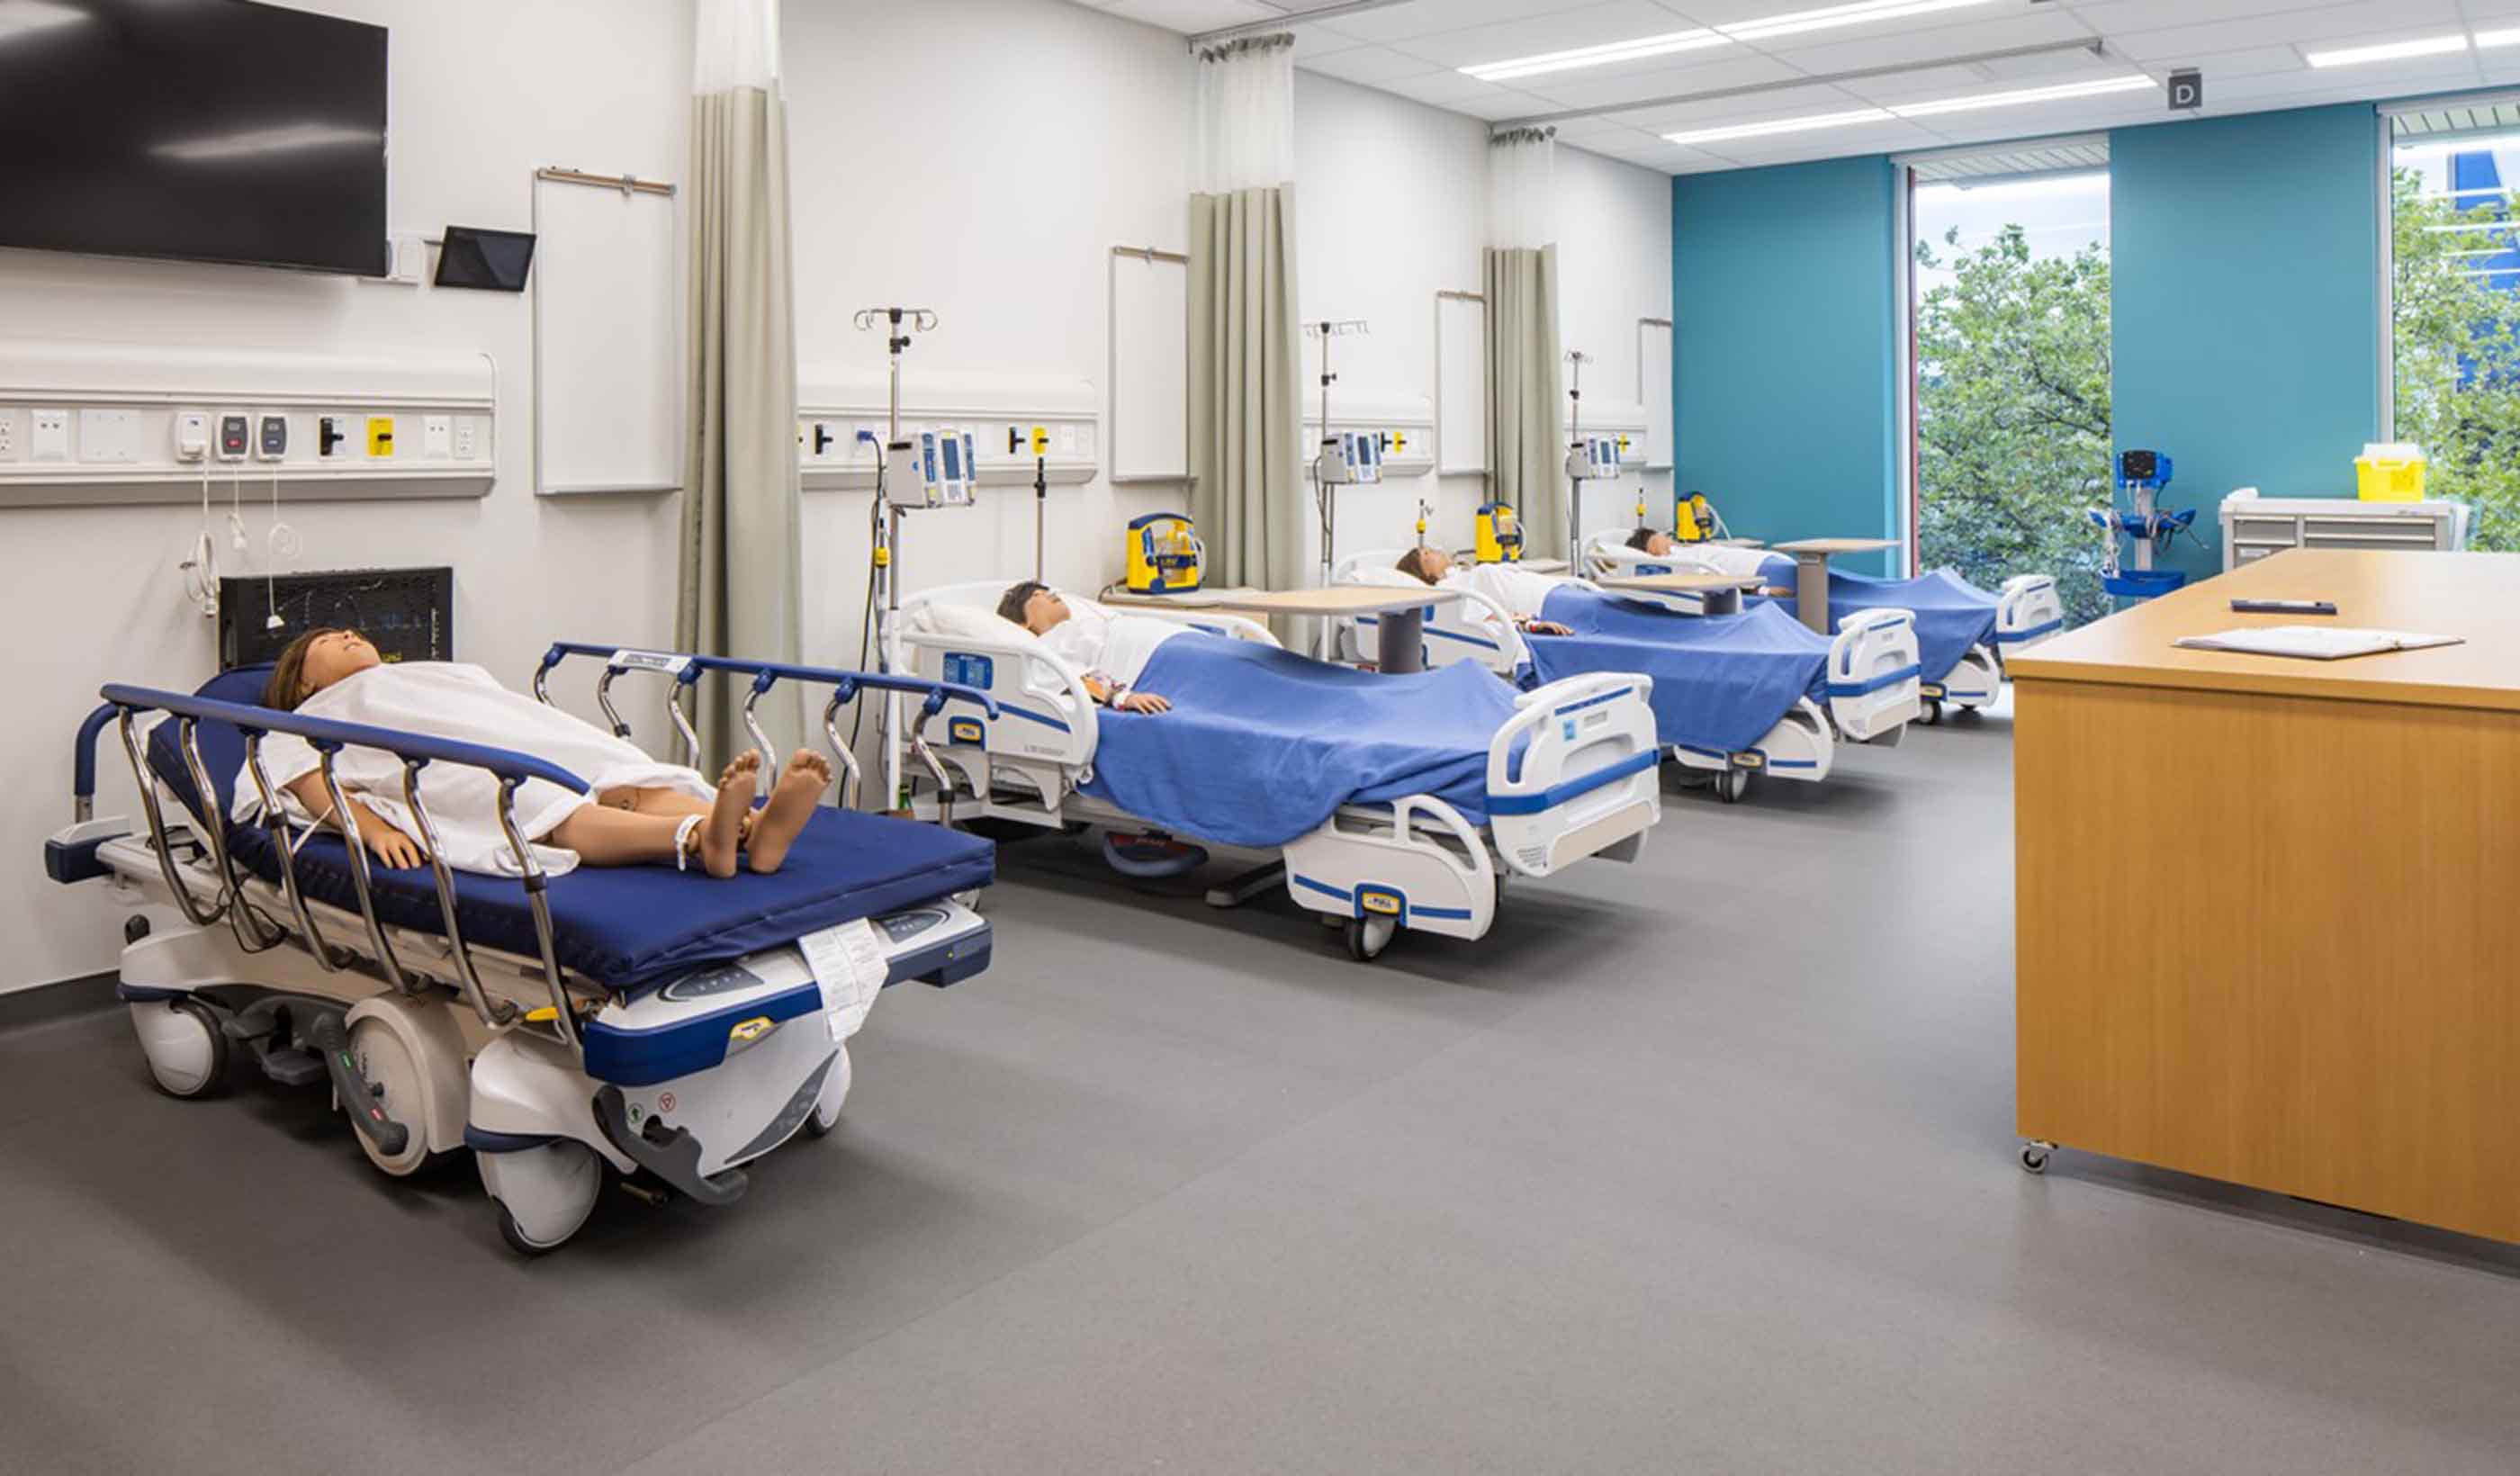 6 tips for designing allied health education facilities